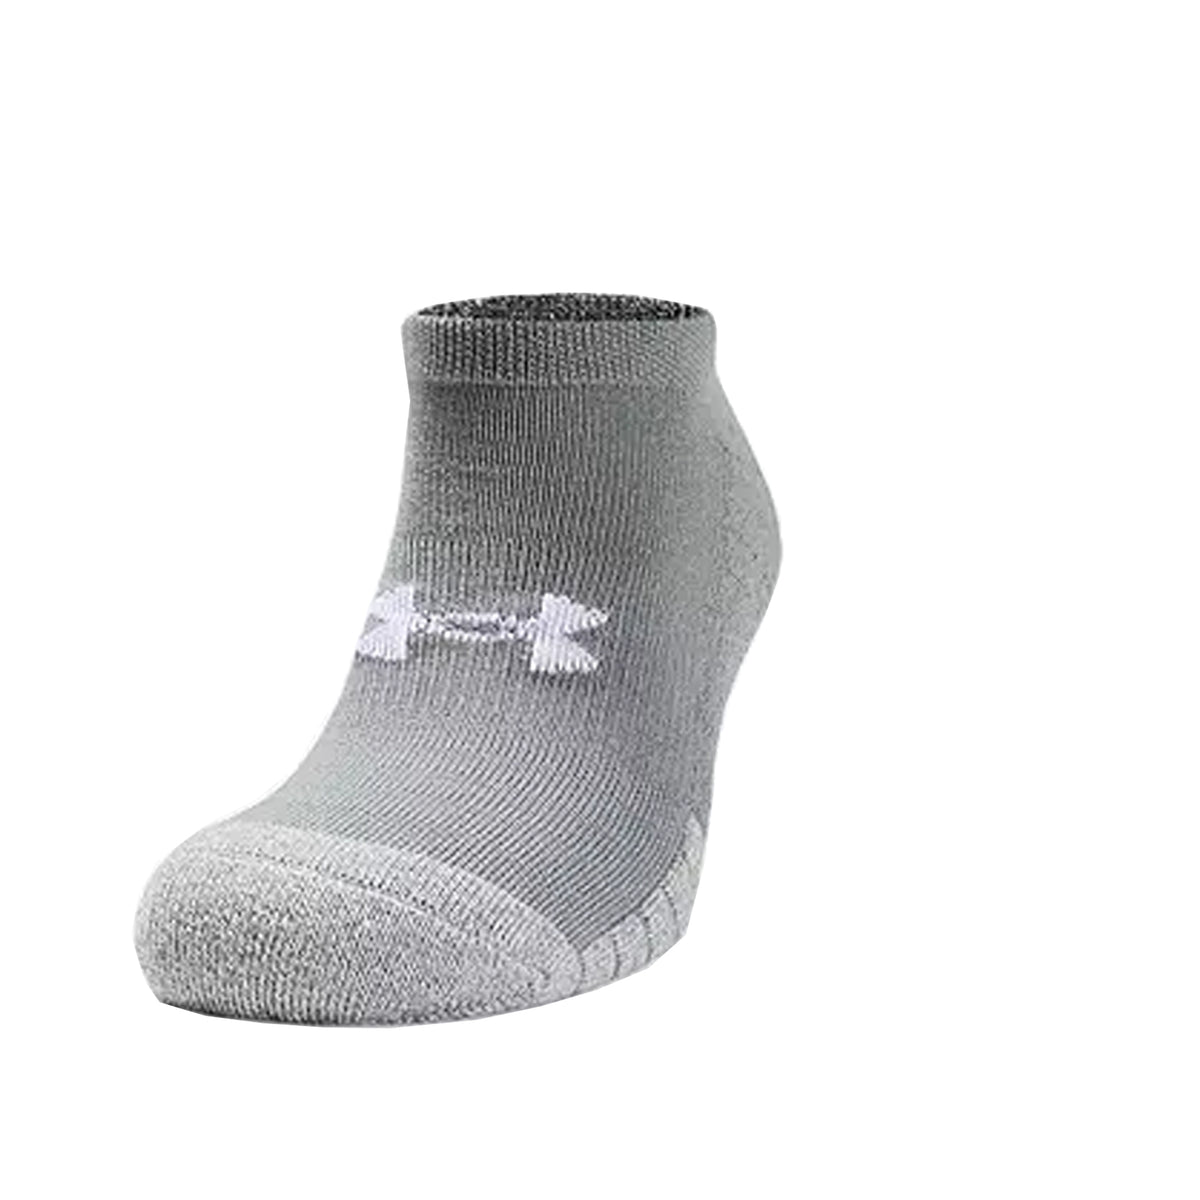 Under Armour No Show Socks 3 Pack: Grey